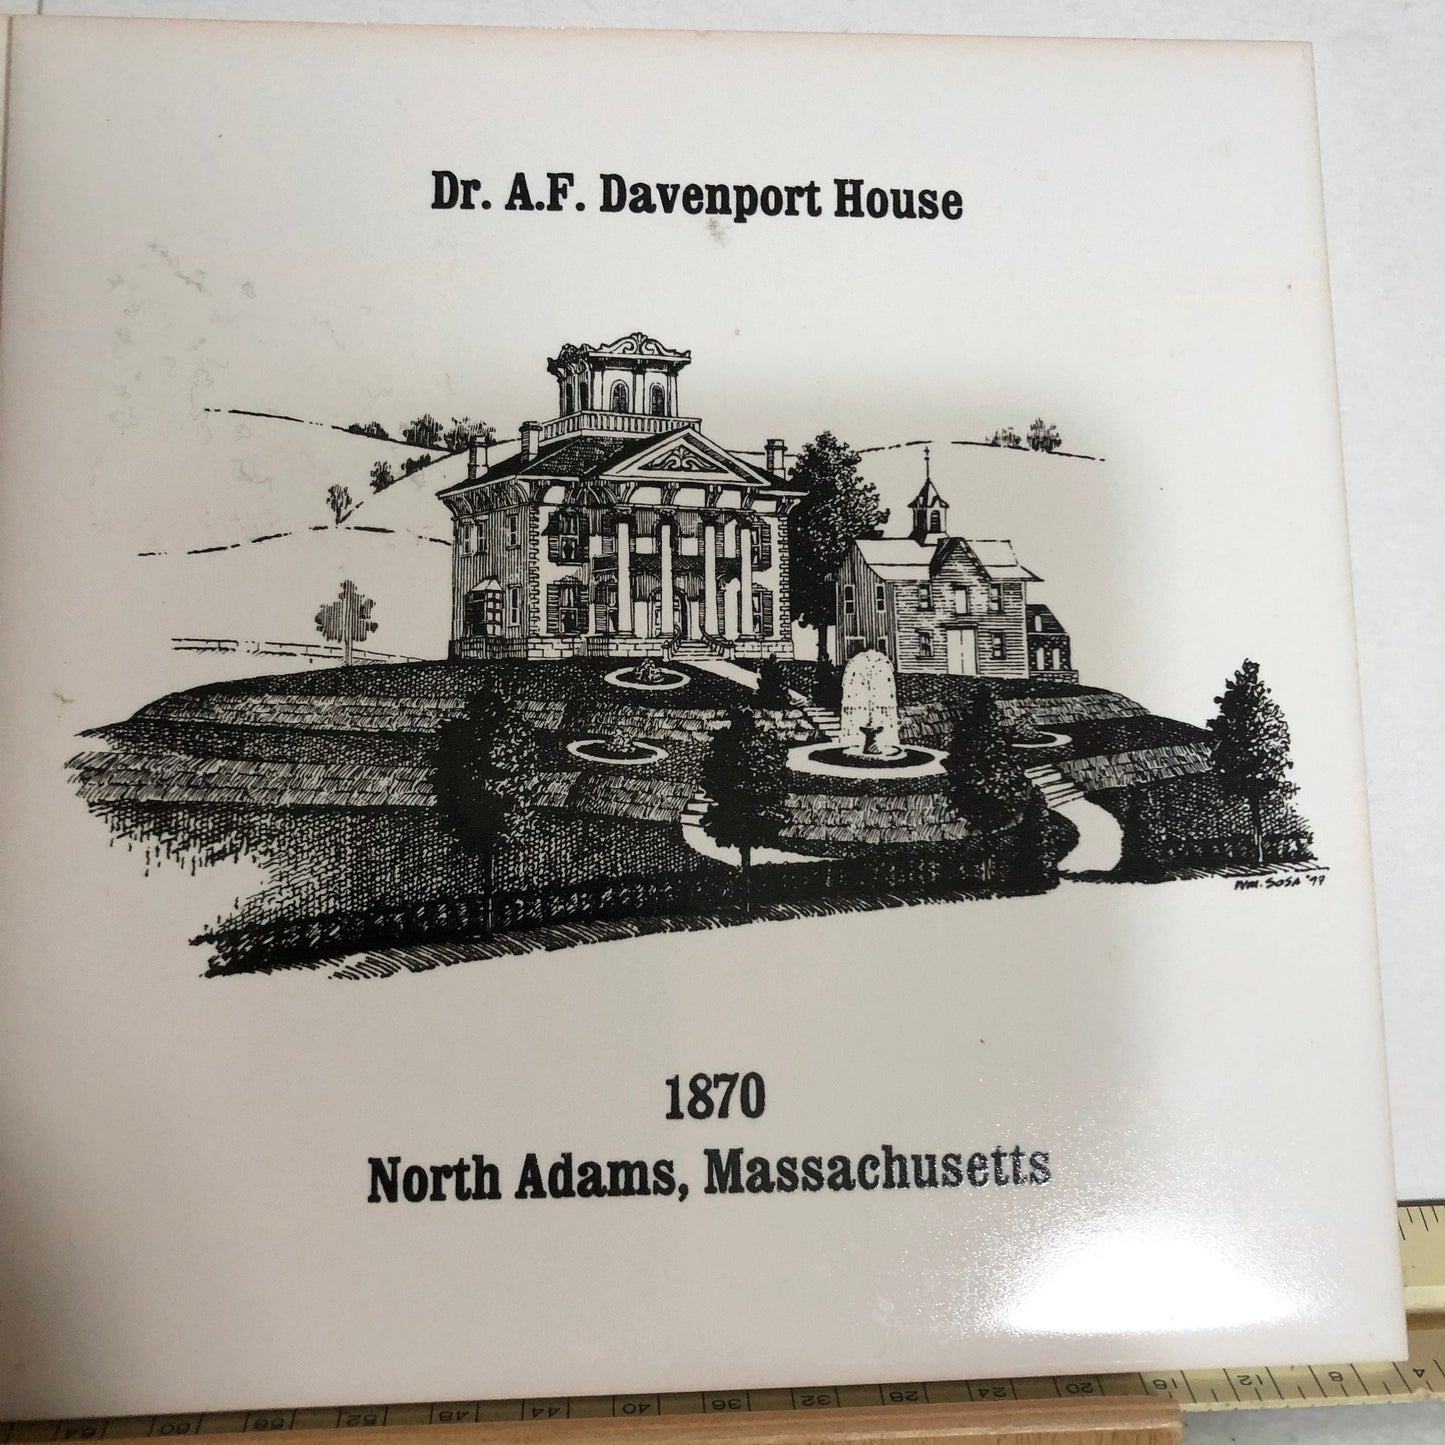 Sheffield Pottery, Tile Wall Hanging, Depicting Homes Of Dr. A.F. Davenport House & Chesterwood*